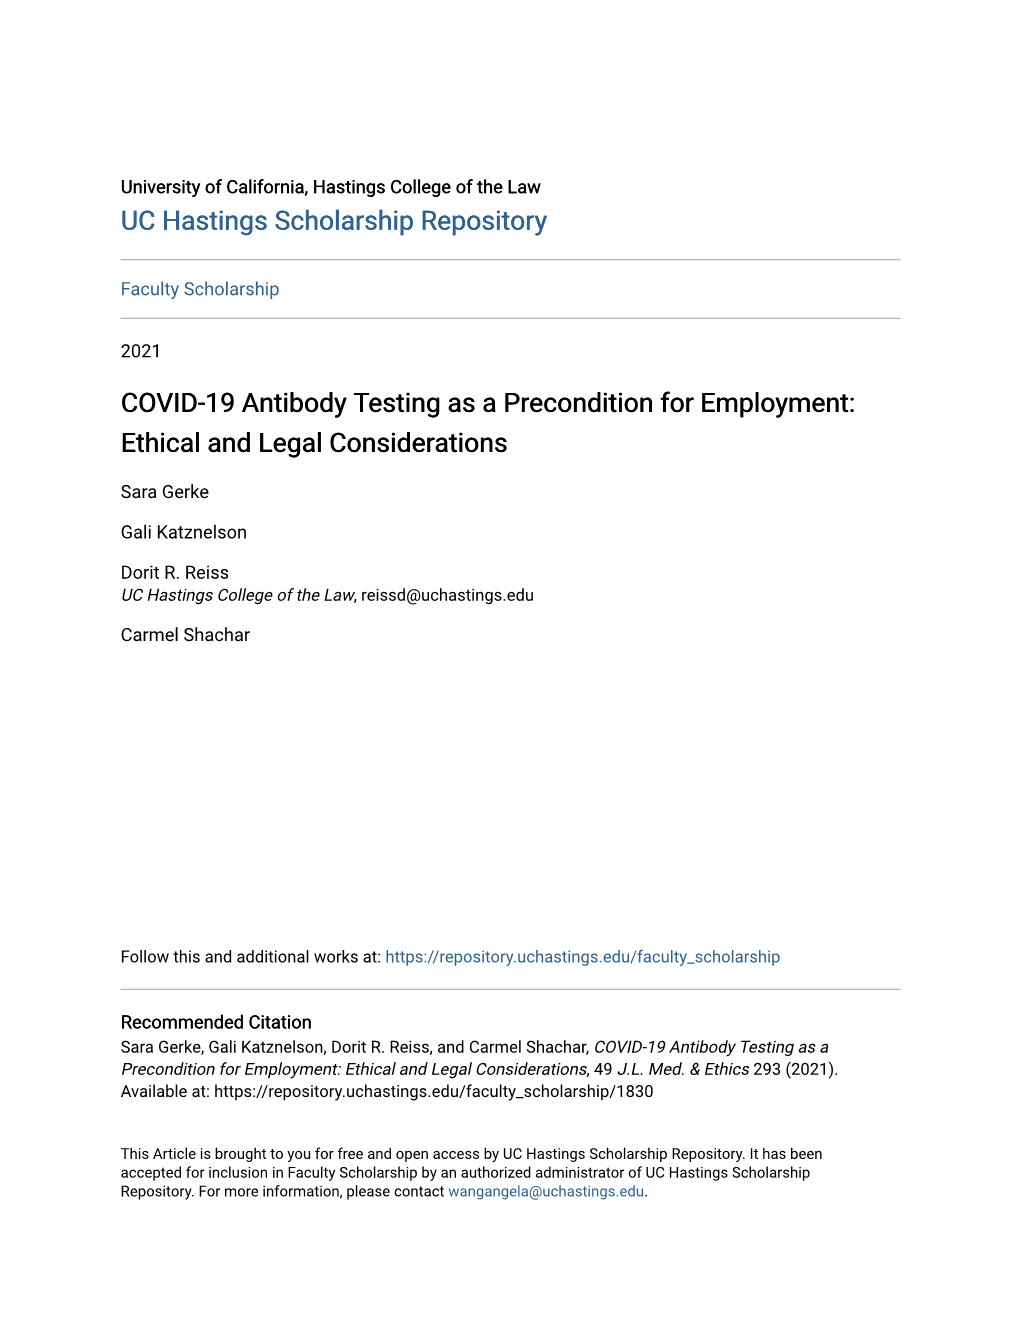 COVID-19 Antibody Testing As a Precondition for Employment: Ethical and Legal Considerations